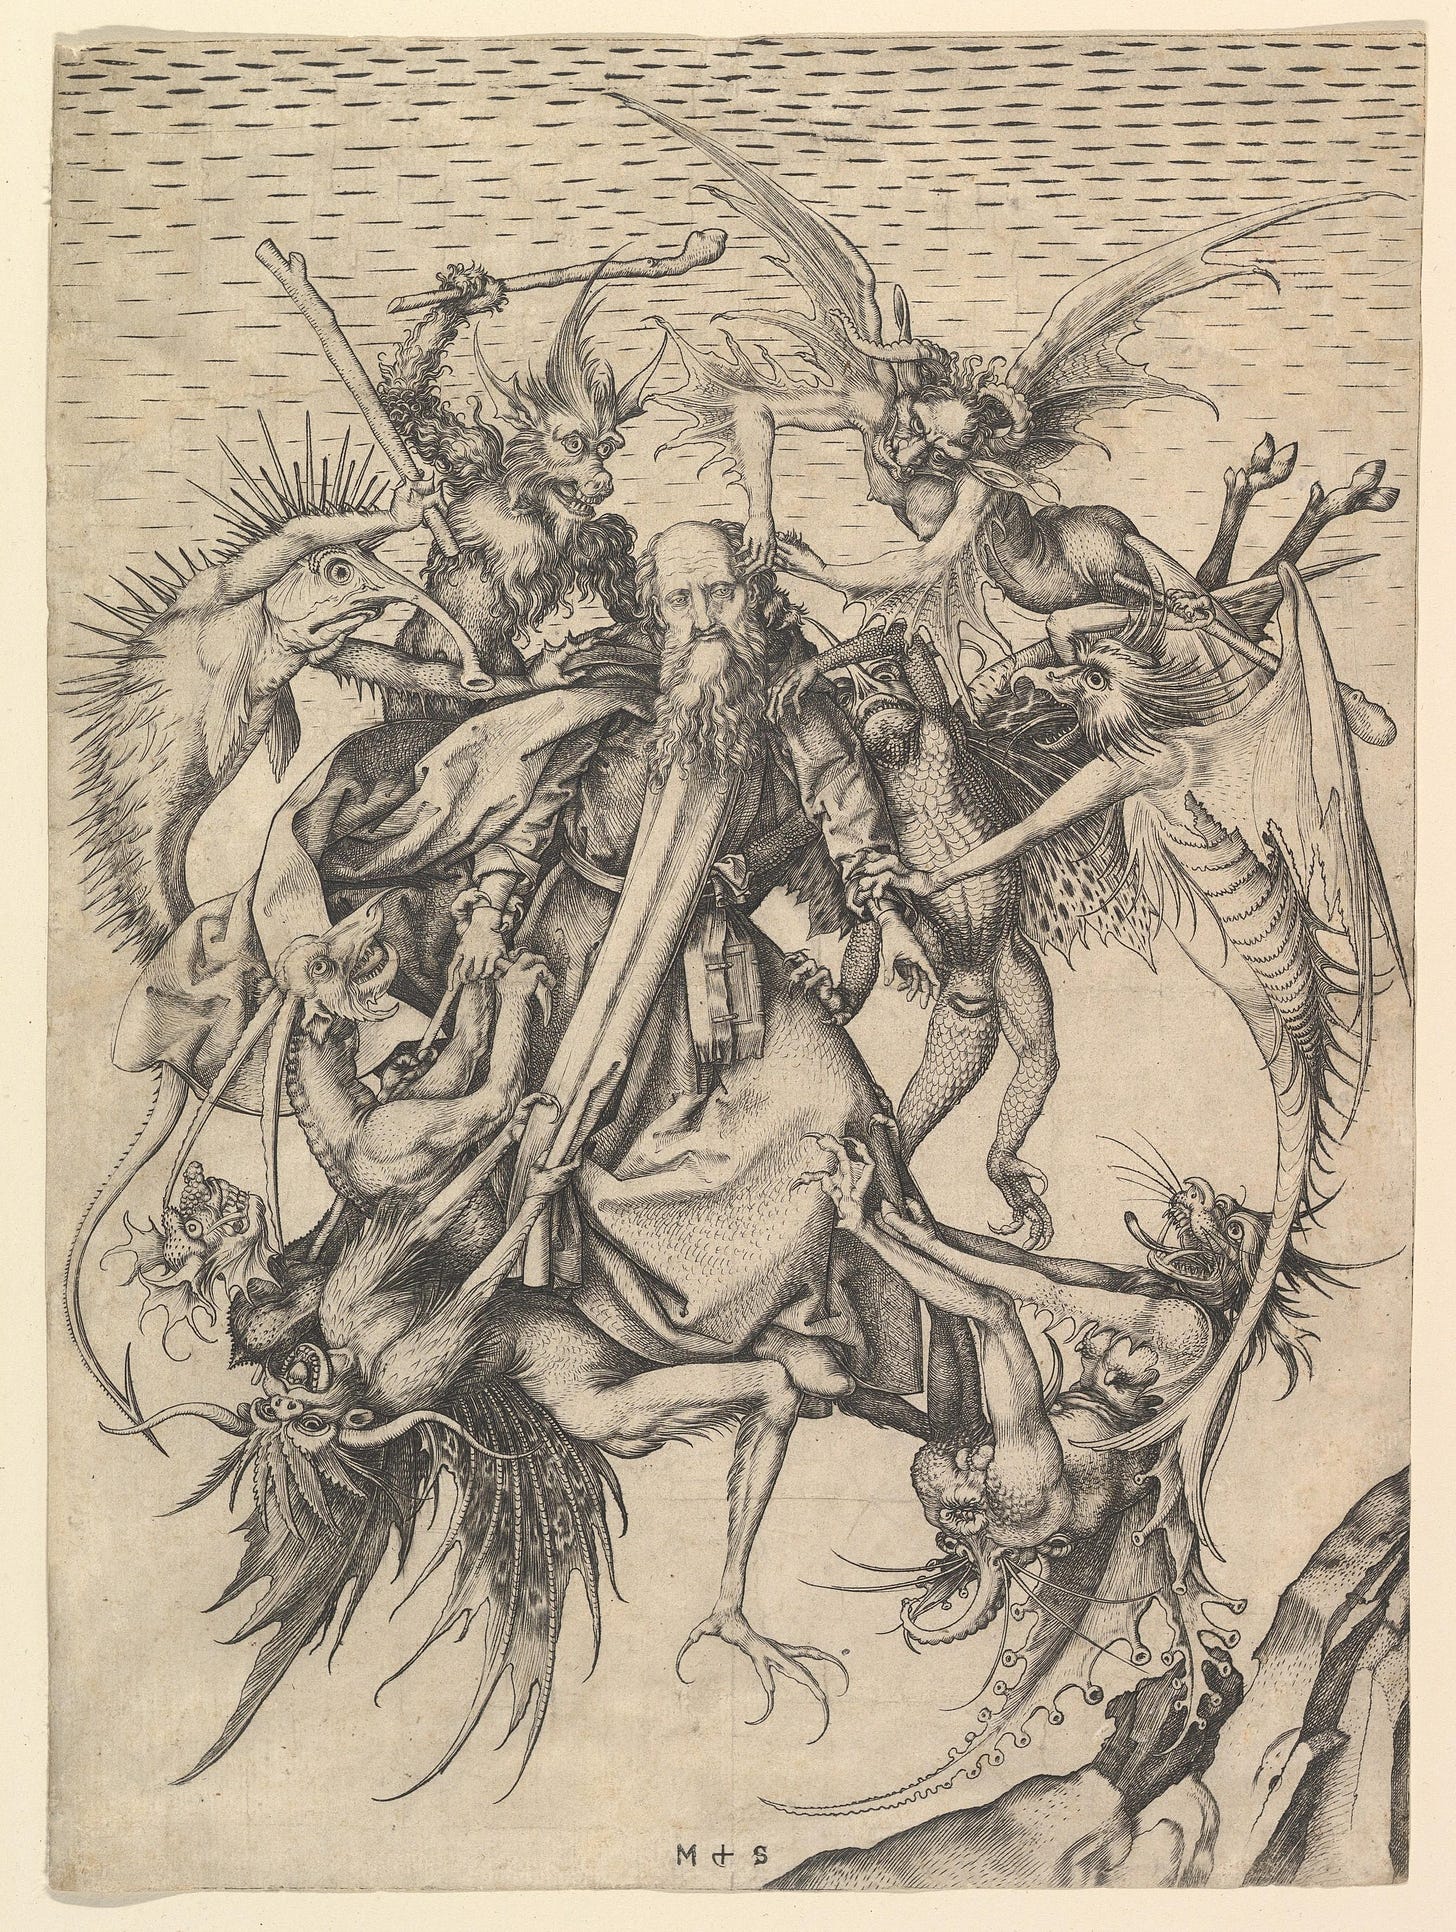 By Martin Schongauer - http://www.abcgallery.com/S/schongauer/schongauer12.htmlimage, Public Domain, https://commons.wikimedia.org/w/index.php?curid=1008230